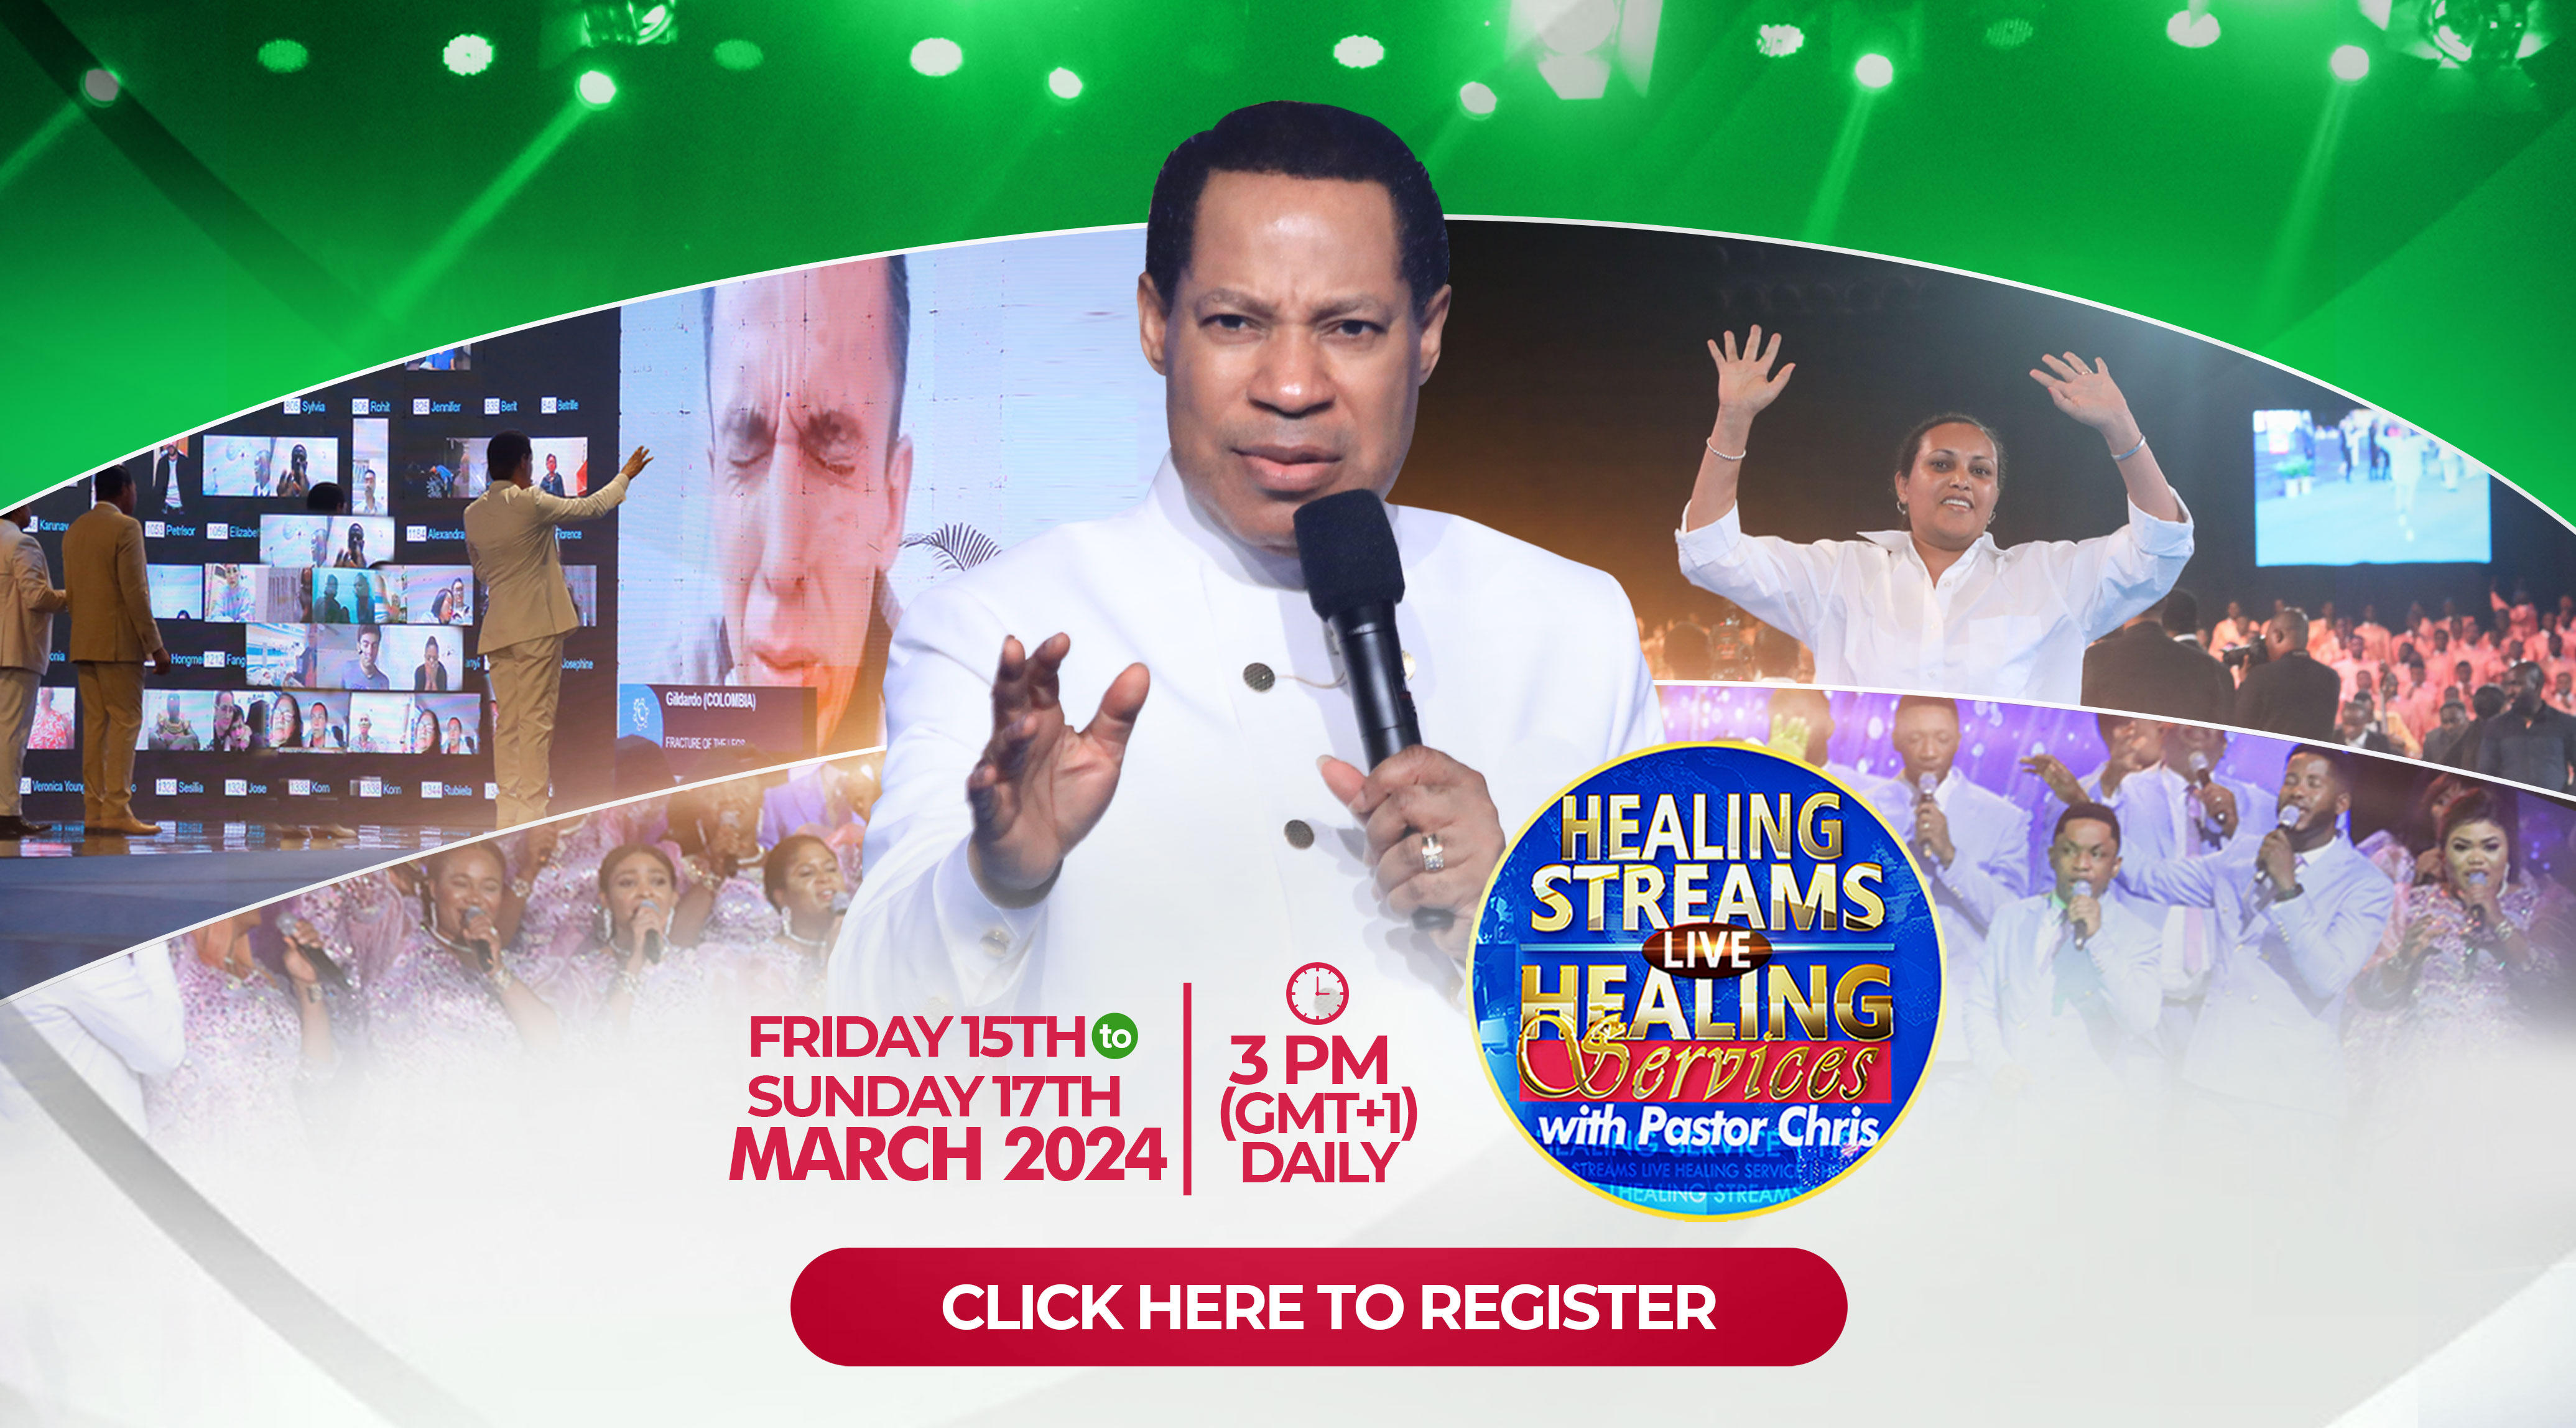 DECREES OF TRANSFORMATION: MARCH 2024 HEALING STREAMS LIVE HEALING SERVICES WITH PASTOR CHRIS